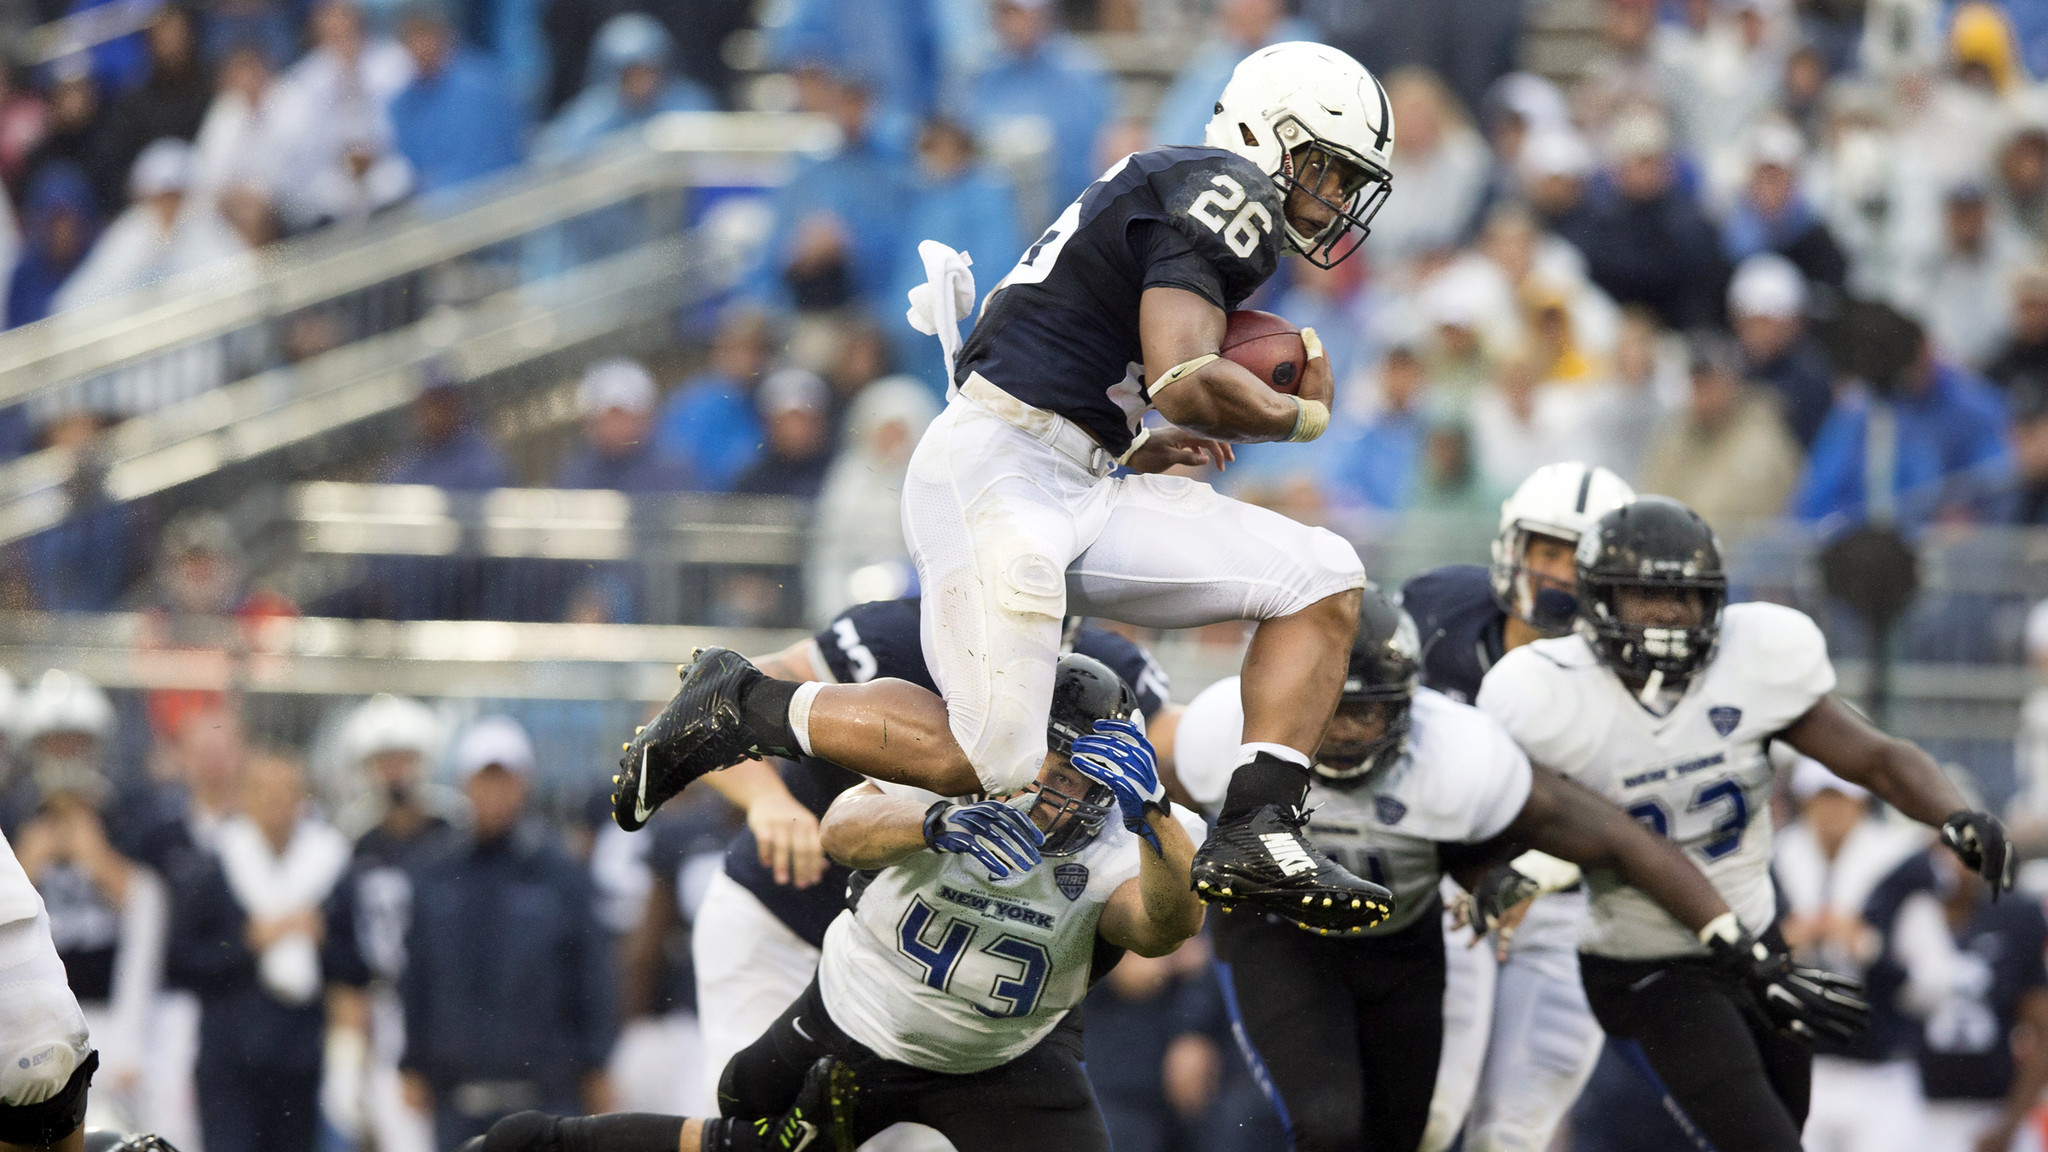 2048x1152 PICTURES: What's next for Penn State's Saquon Barkley? - The Morning Call